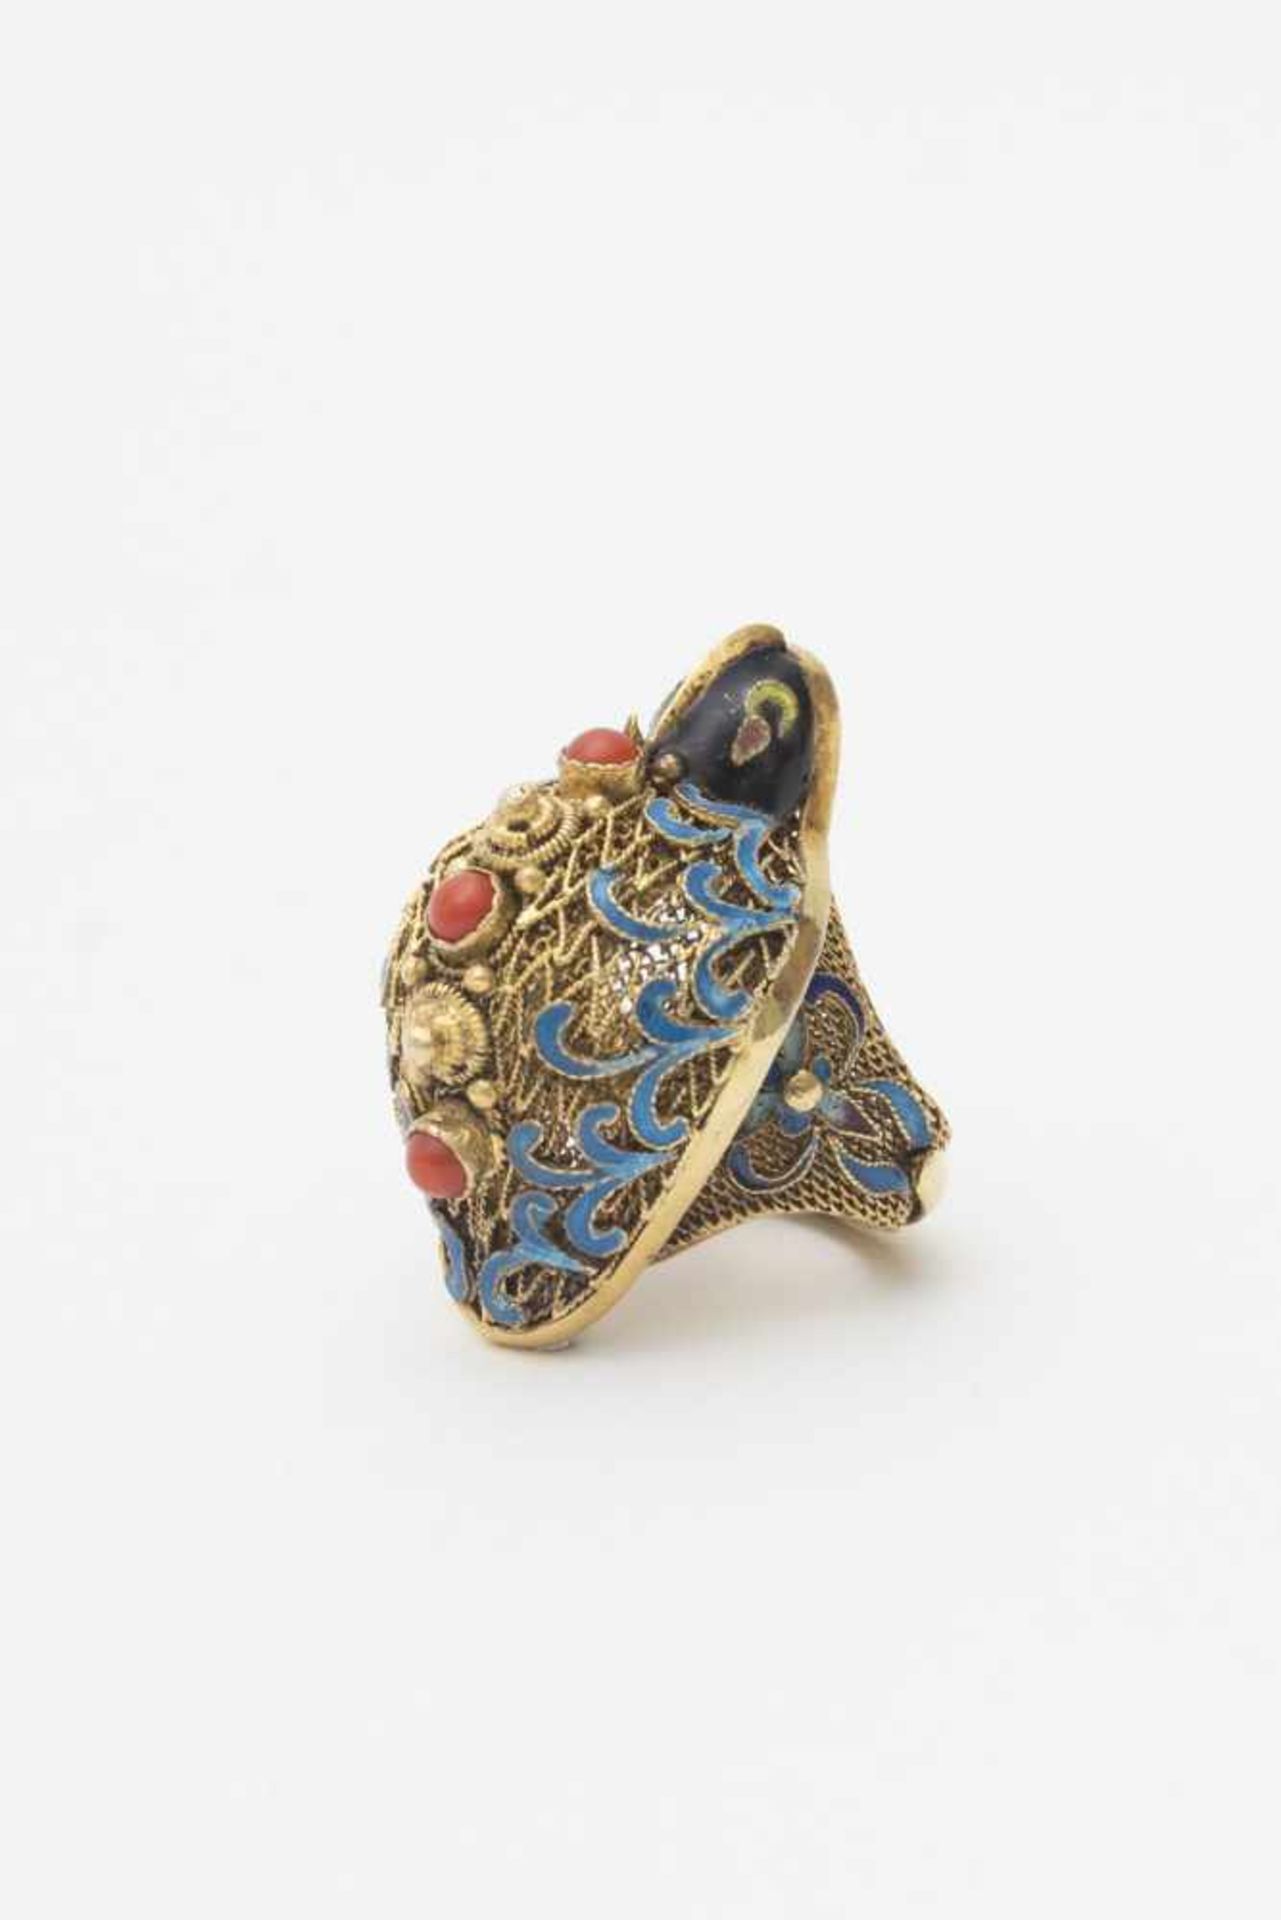 Turtle ring set with coral - China, 20th century Gilded silver filigree, decorated with blue enamel.